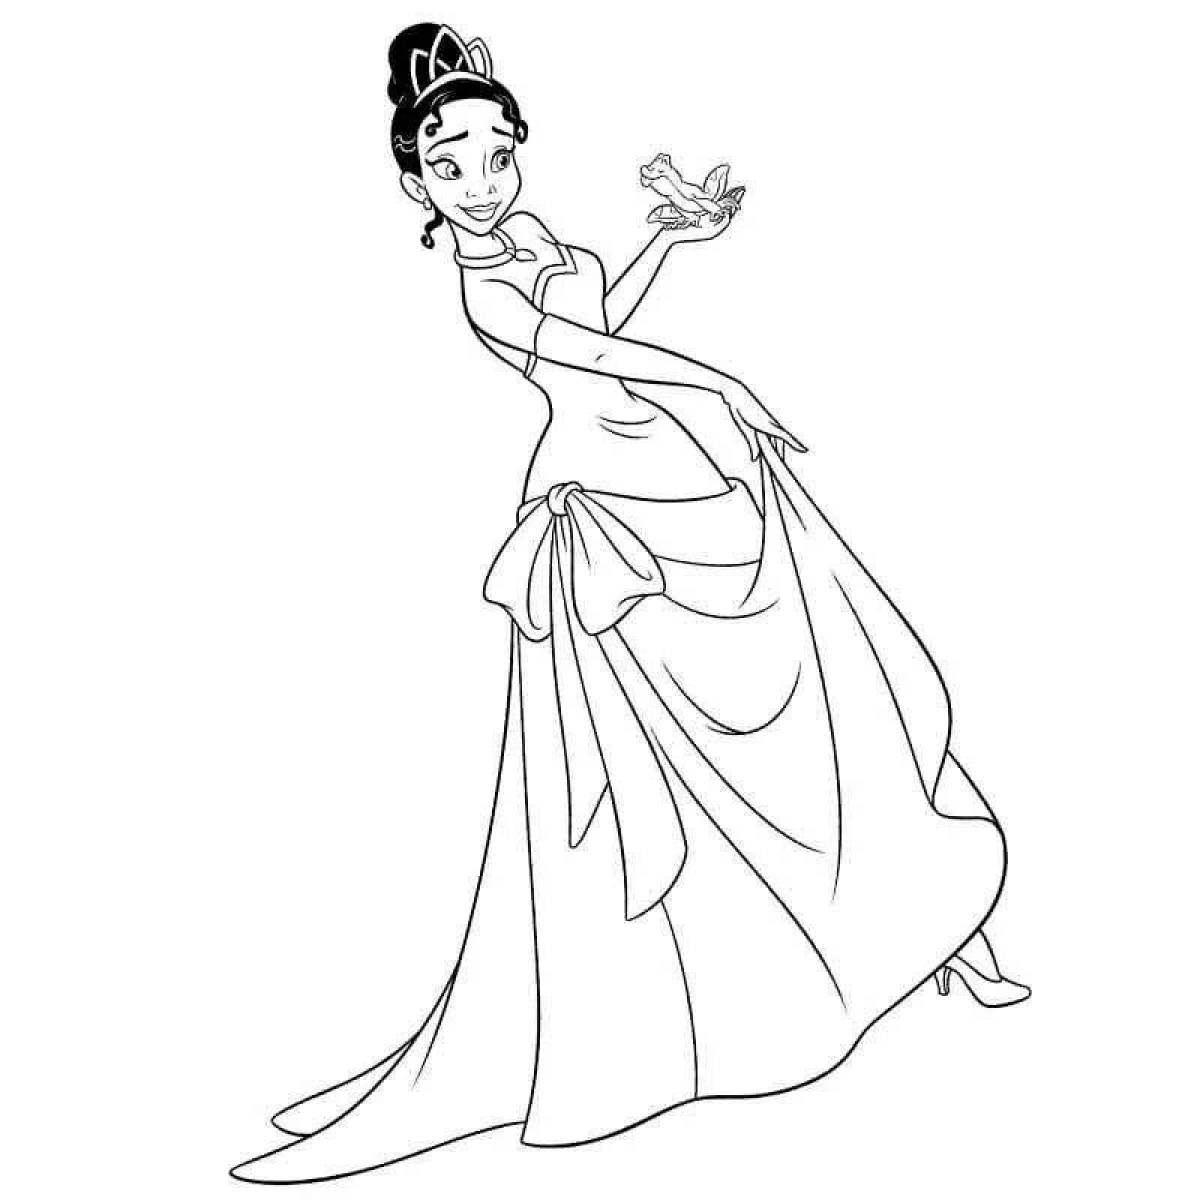 Gorgeous frog princess coloring page